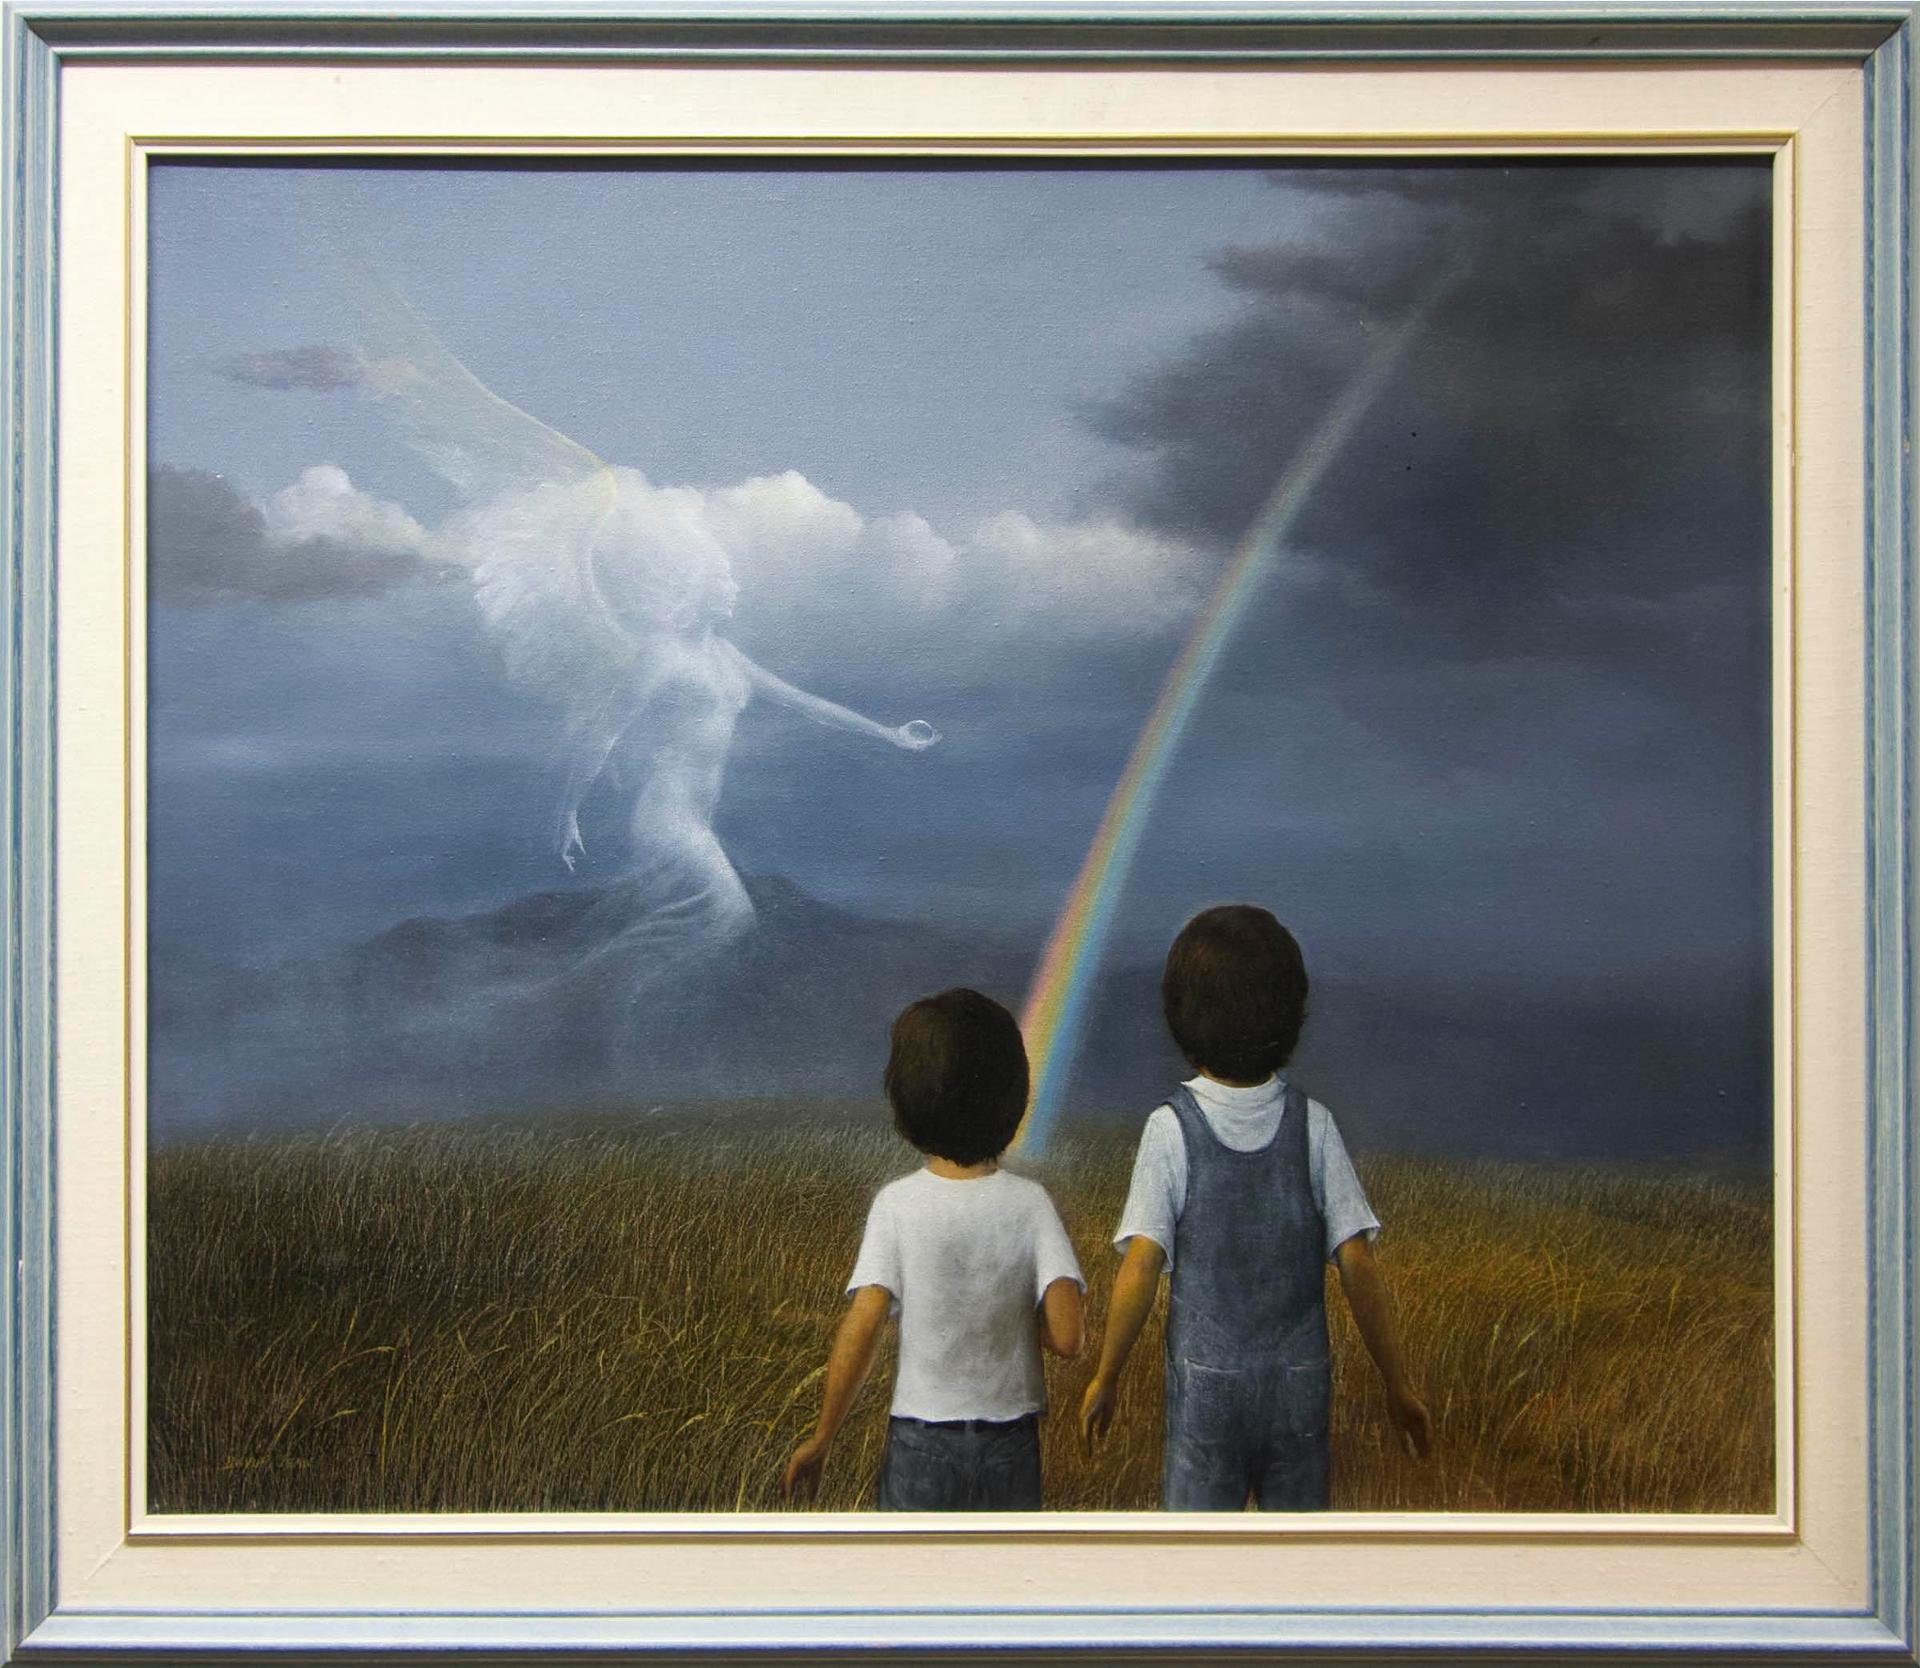 David Jean (1938) - Somewhere Over The Rainbow (Ethereal Series)